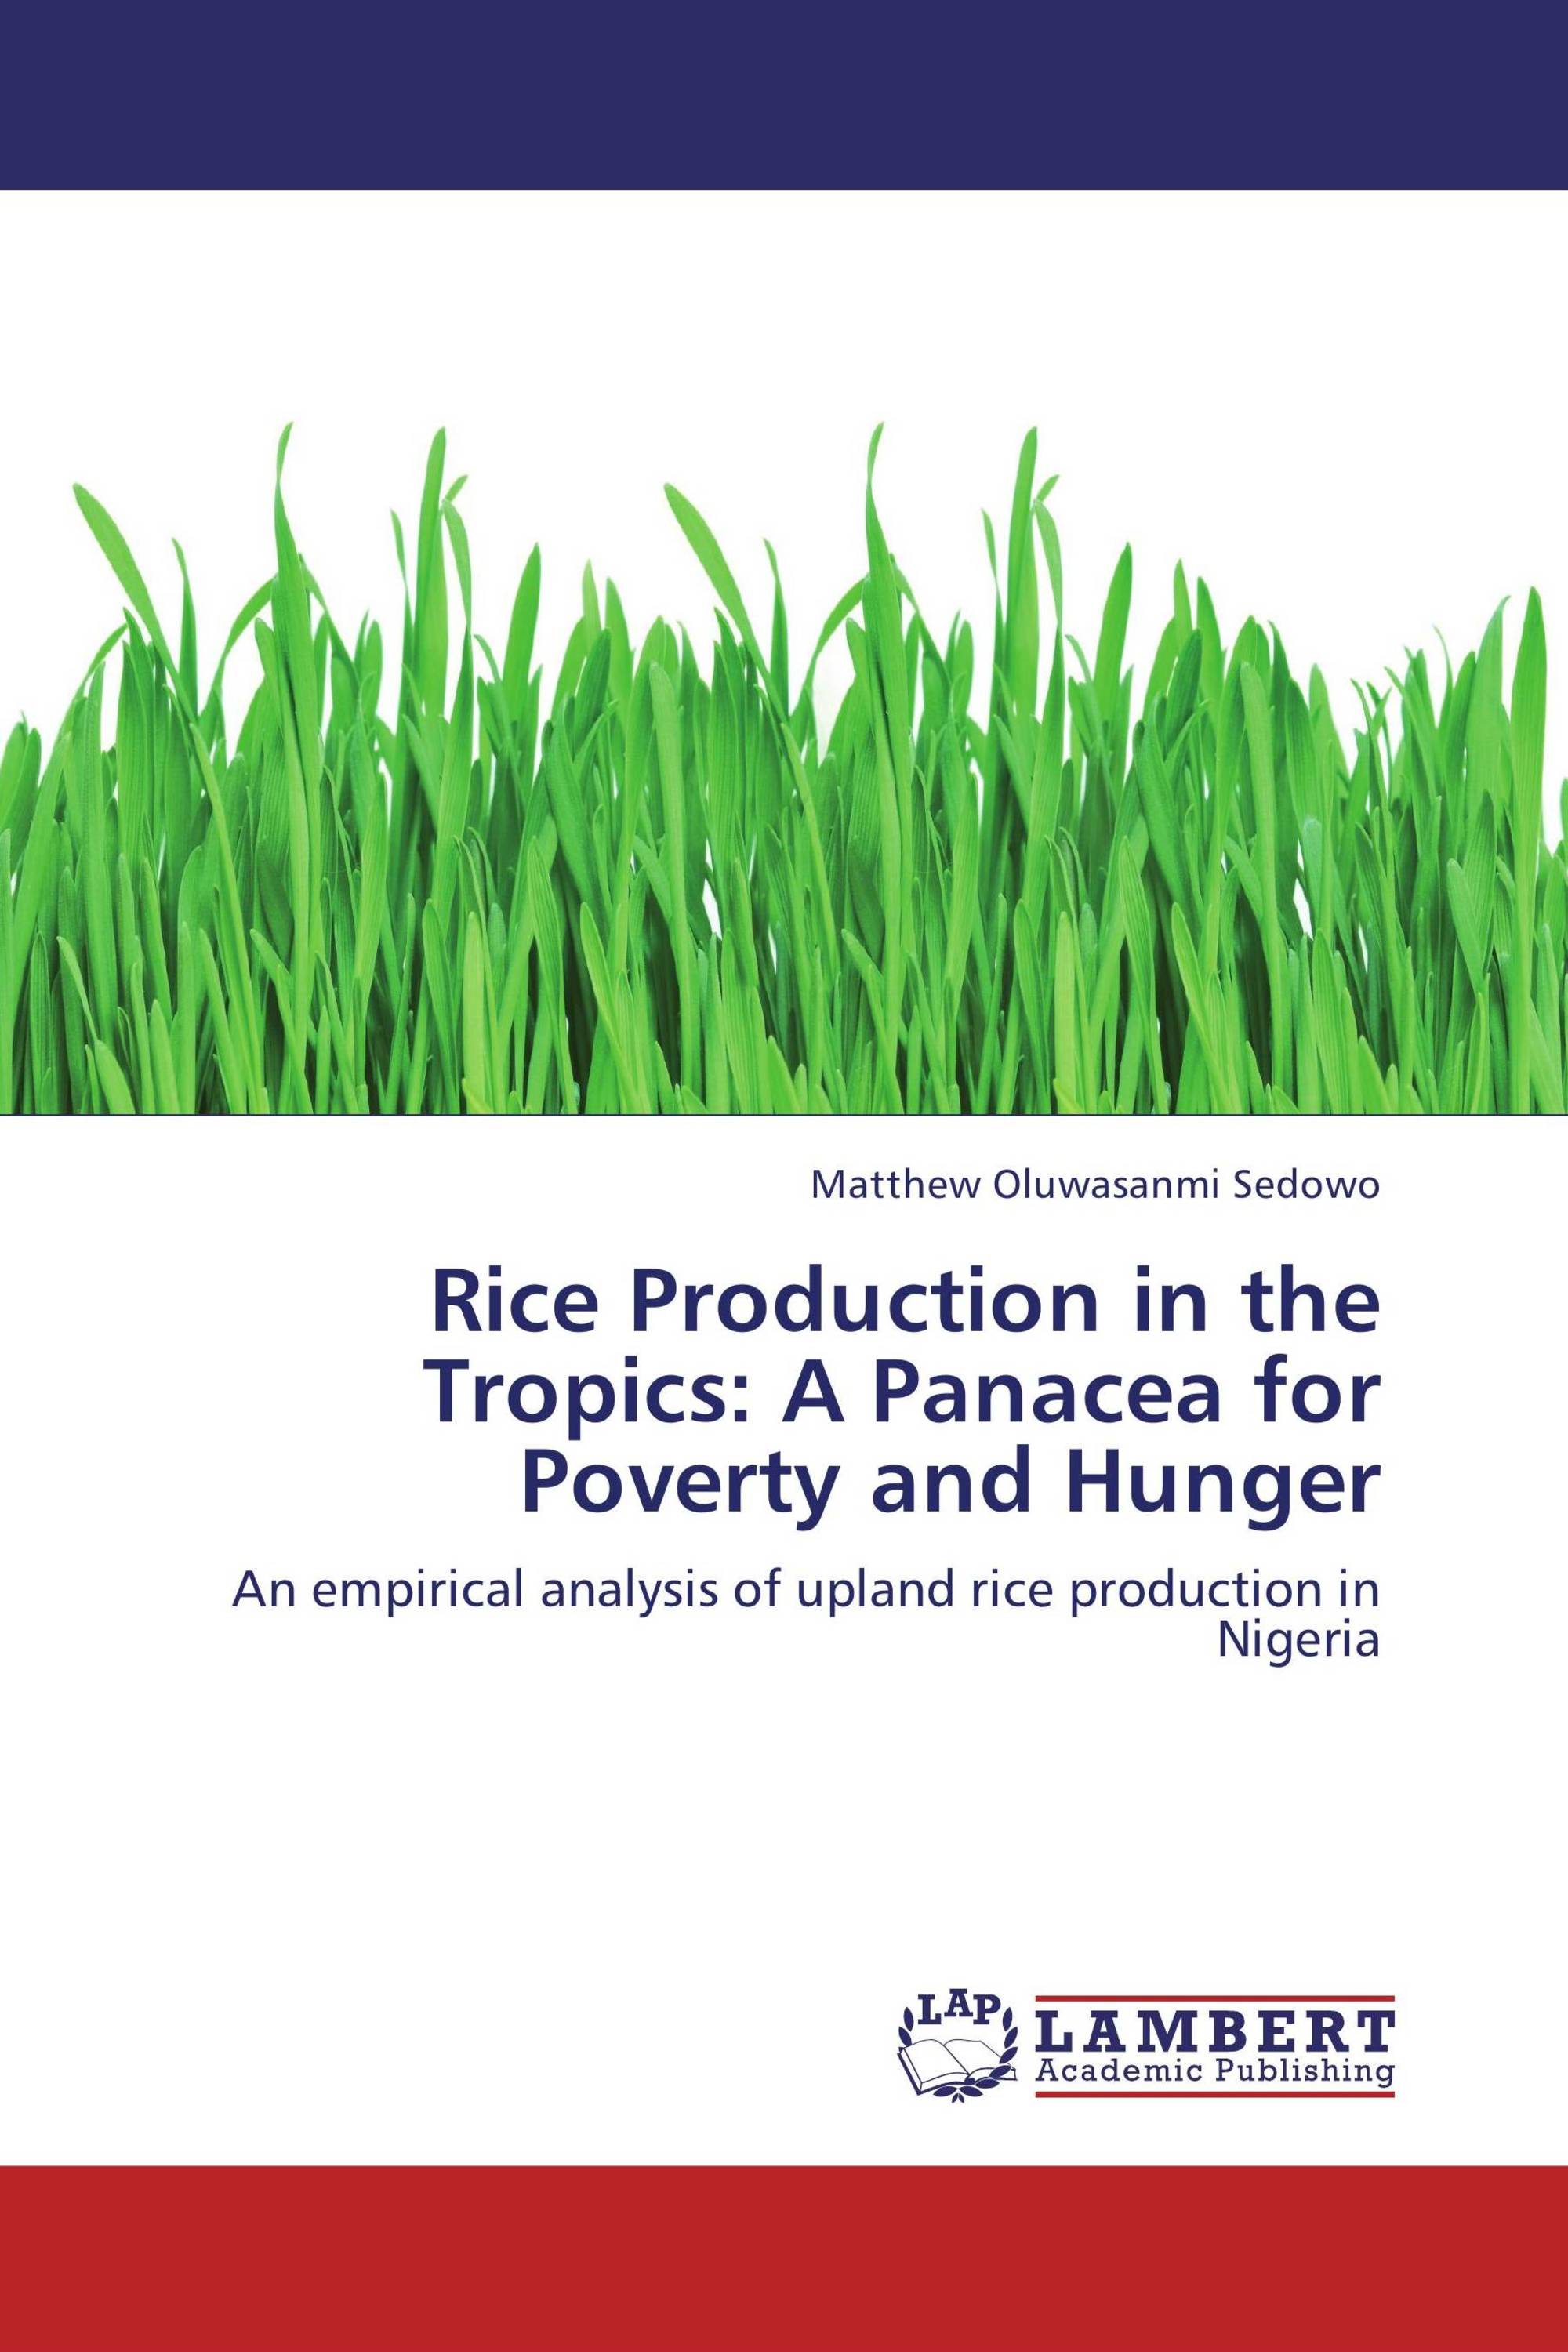 phd thesis on rice